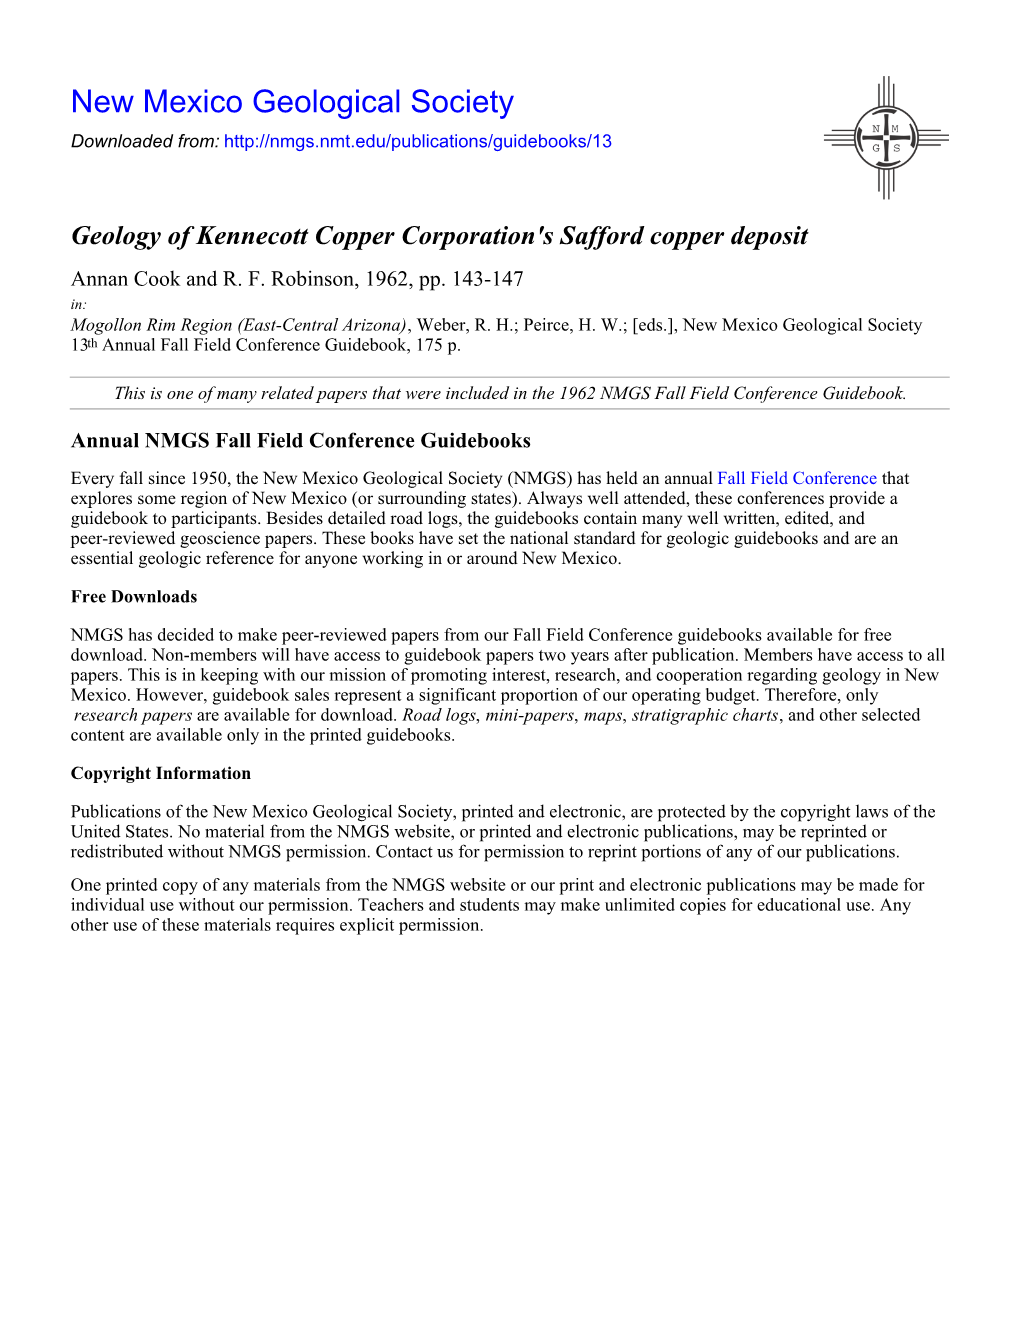 Geology of Kennecott Copper Corporation's Safford Copper Deposit Annan Cook and R